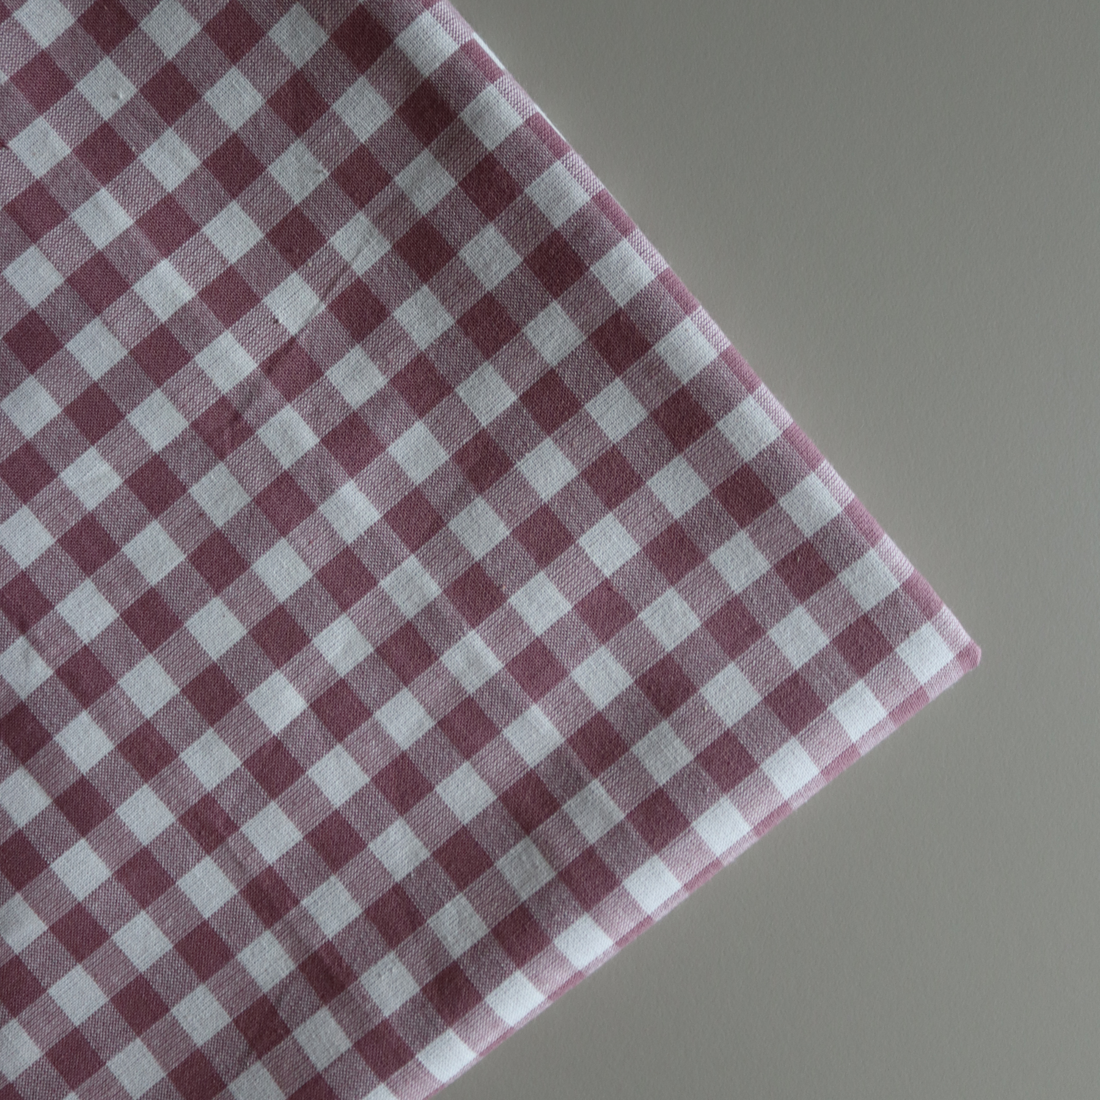 Tulipwood - Small Check Gingham - Cotton Fabric